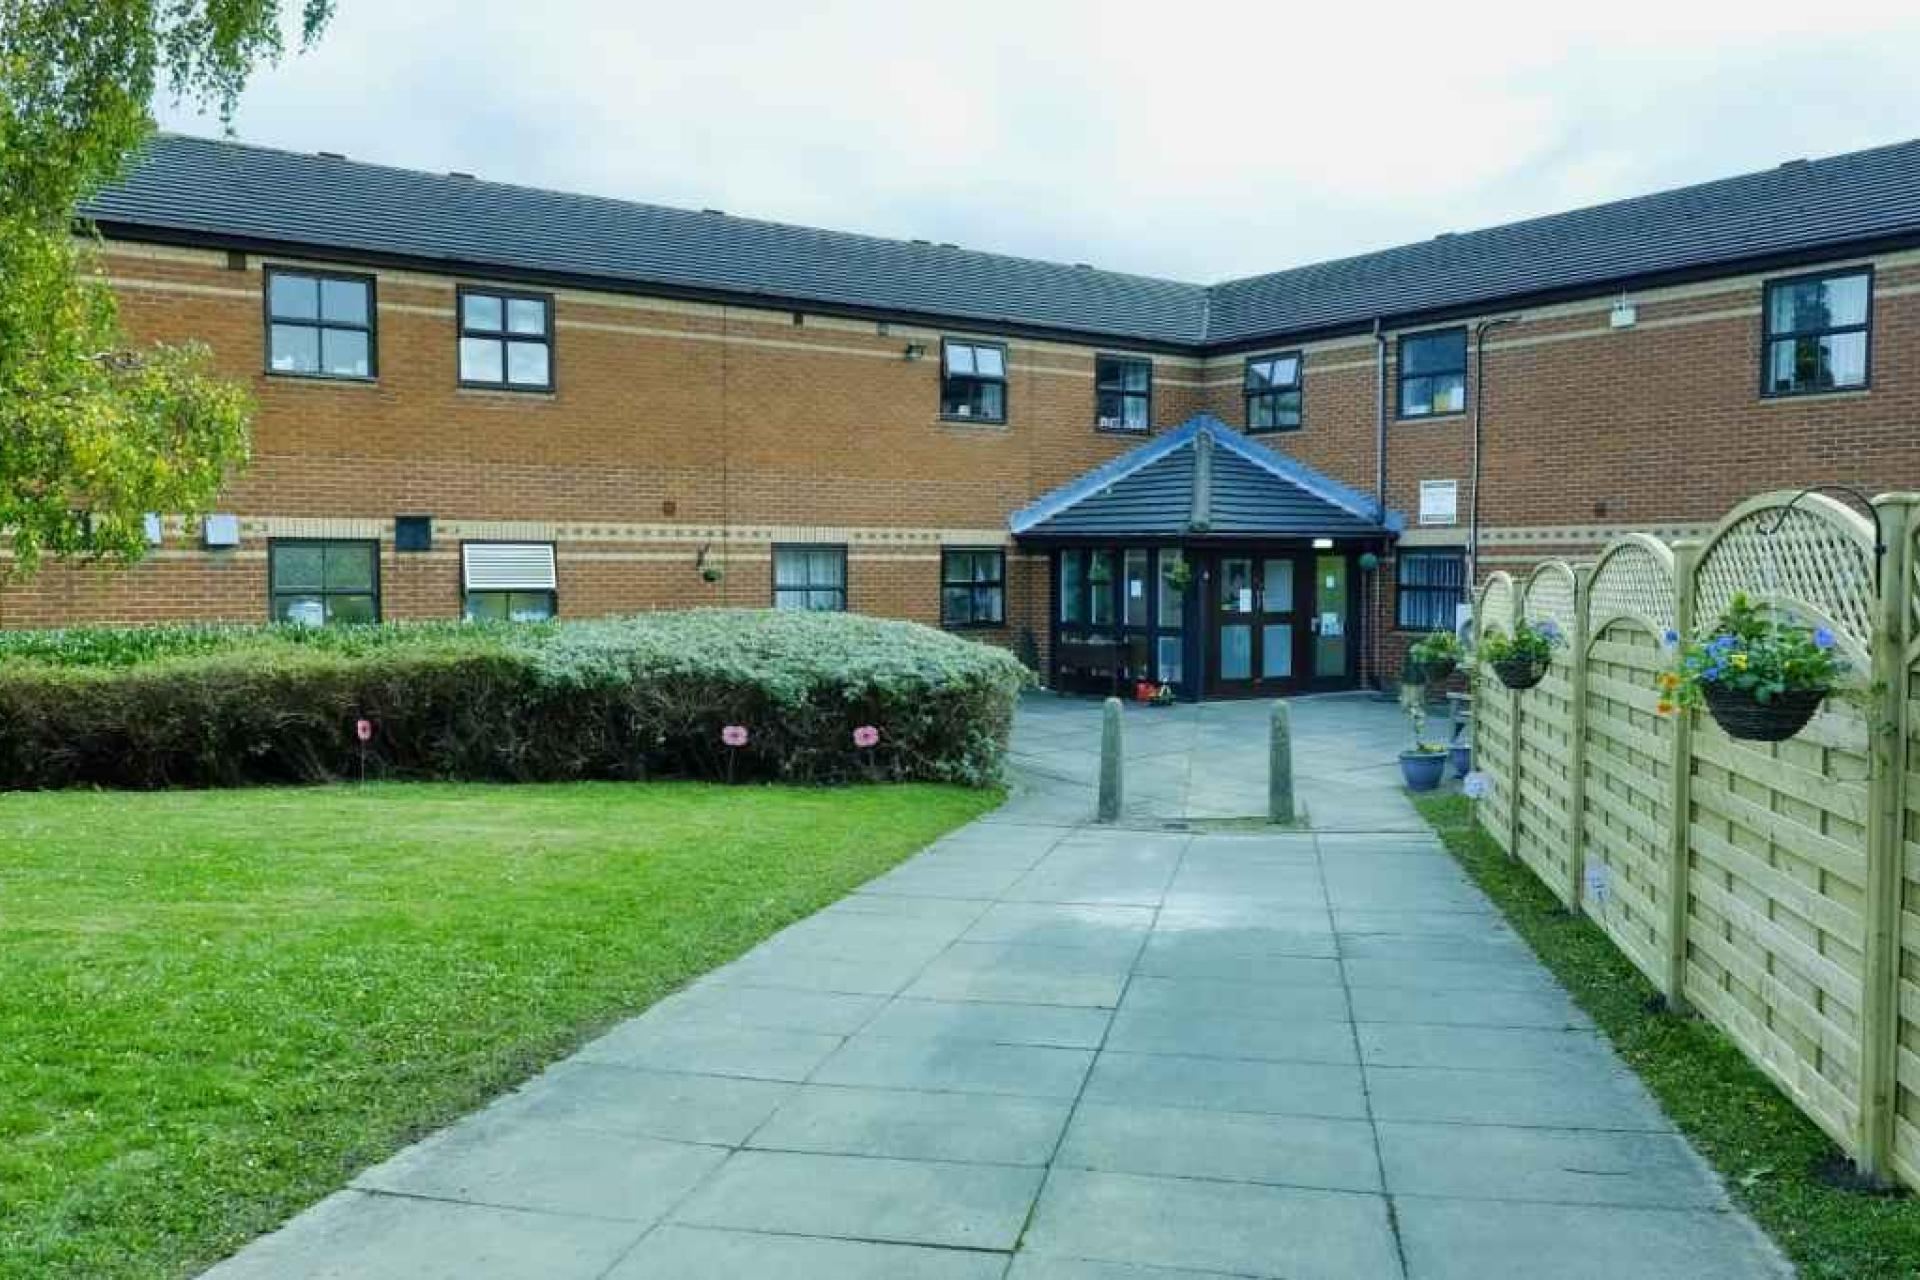 Paisley lodge dementia care home in leeds